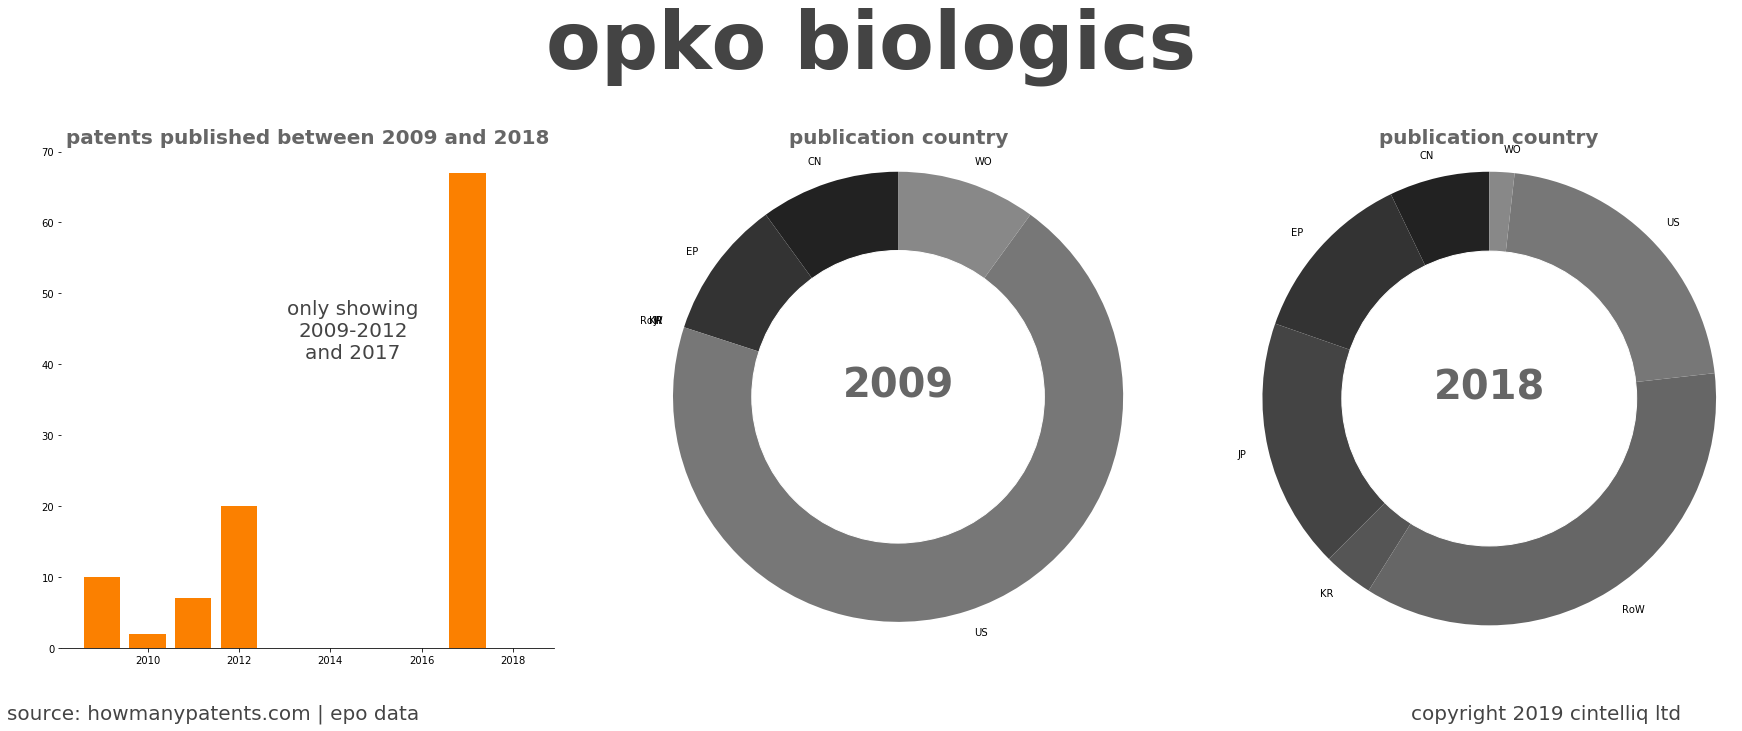 summary of patents for Opko Biologics